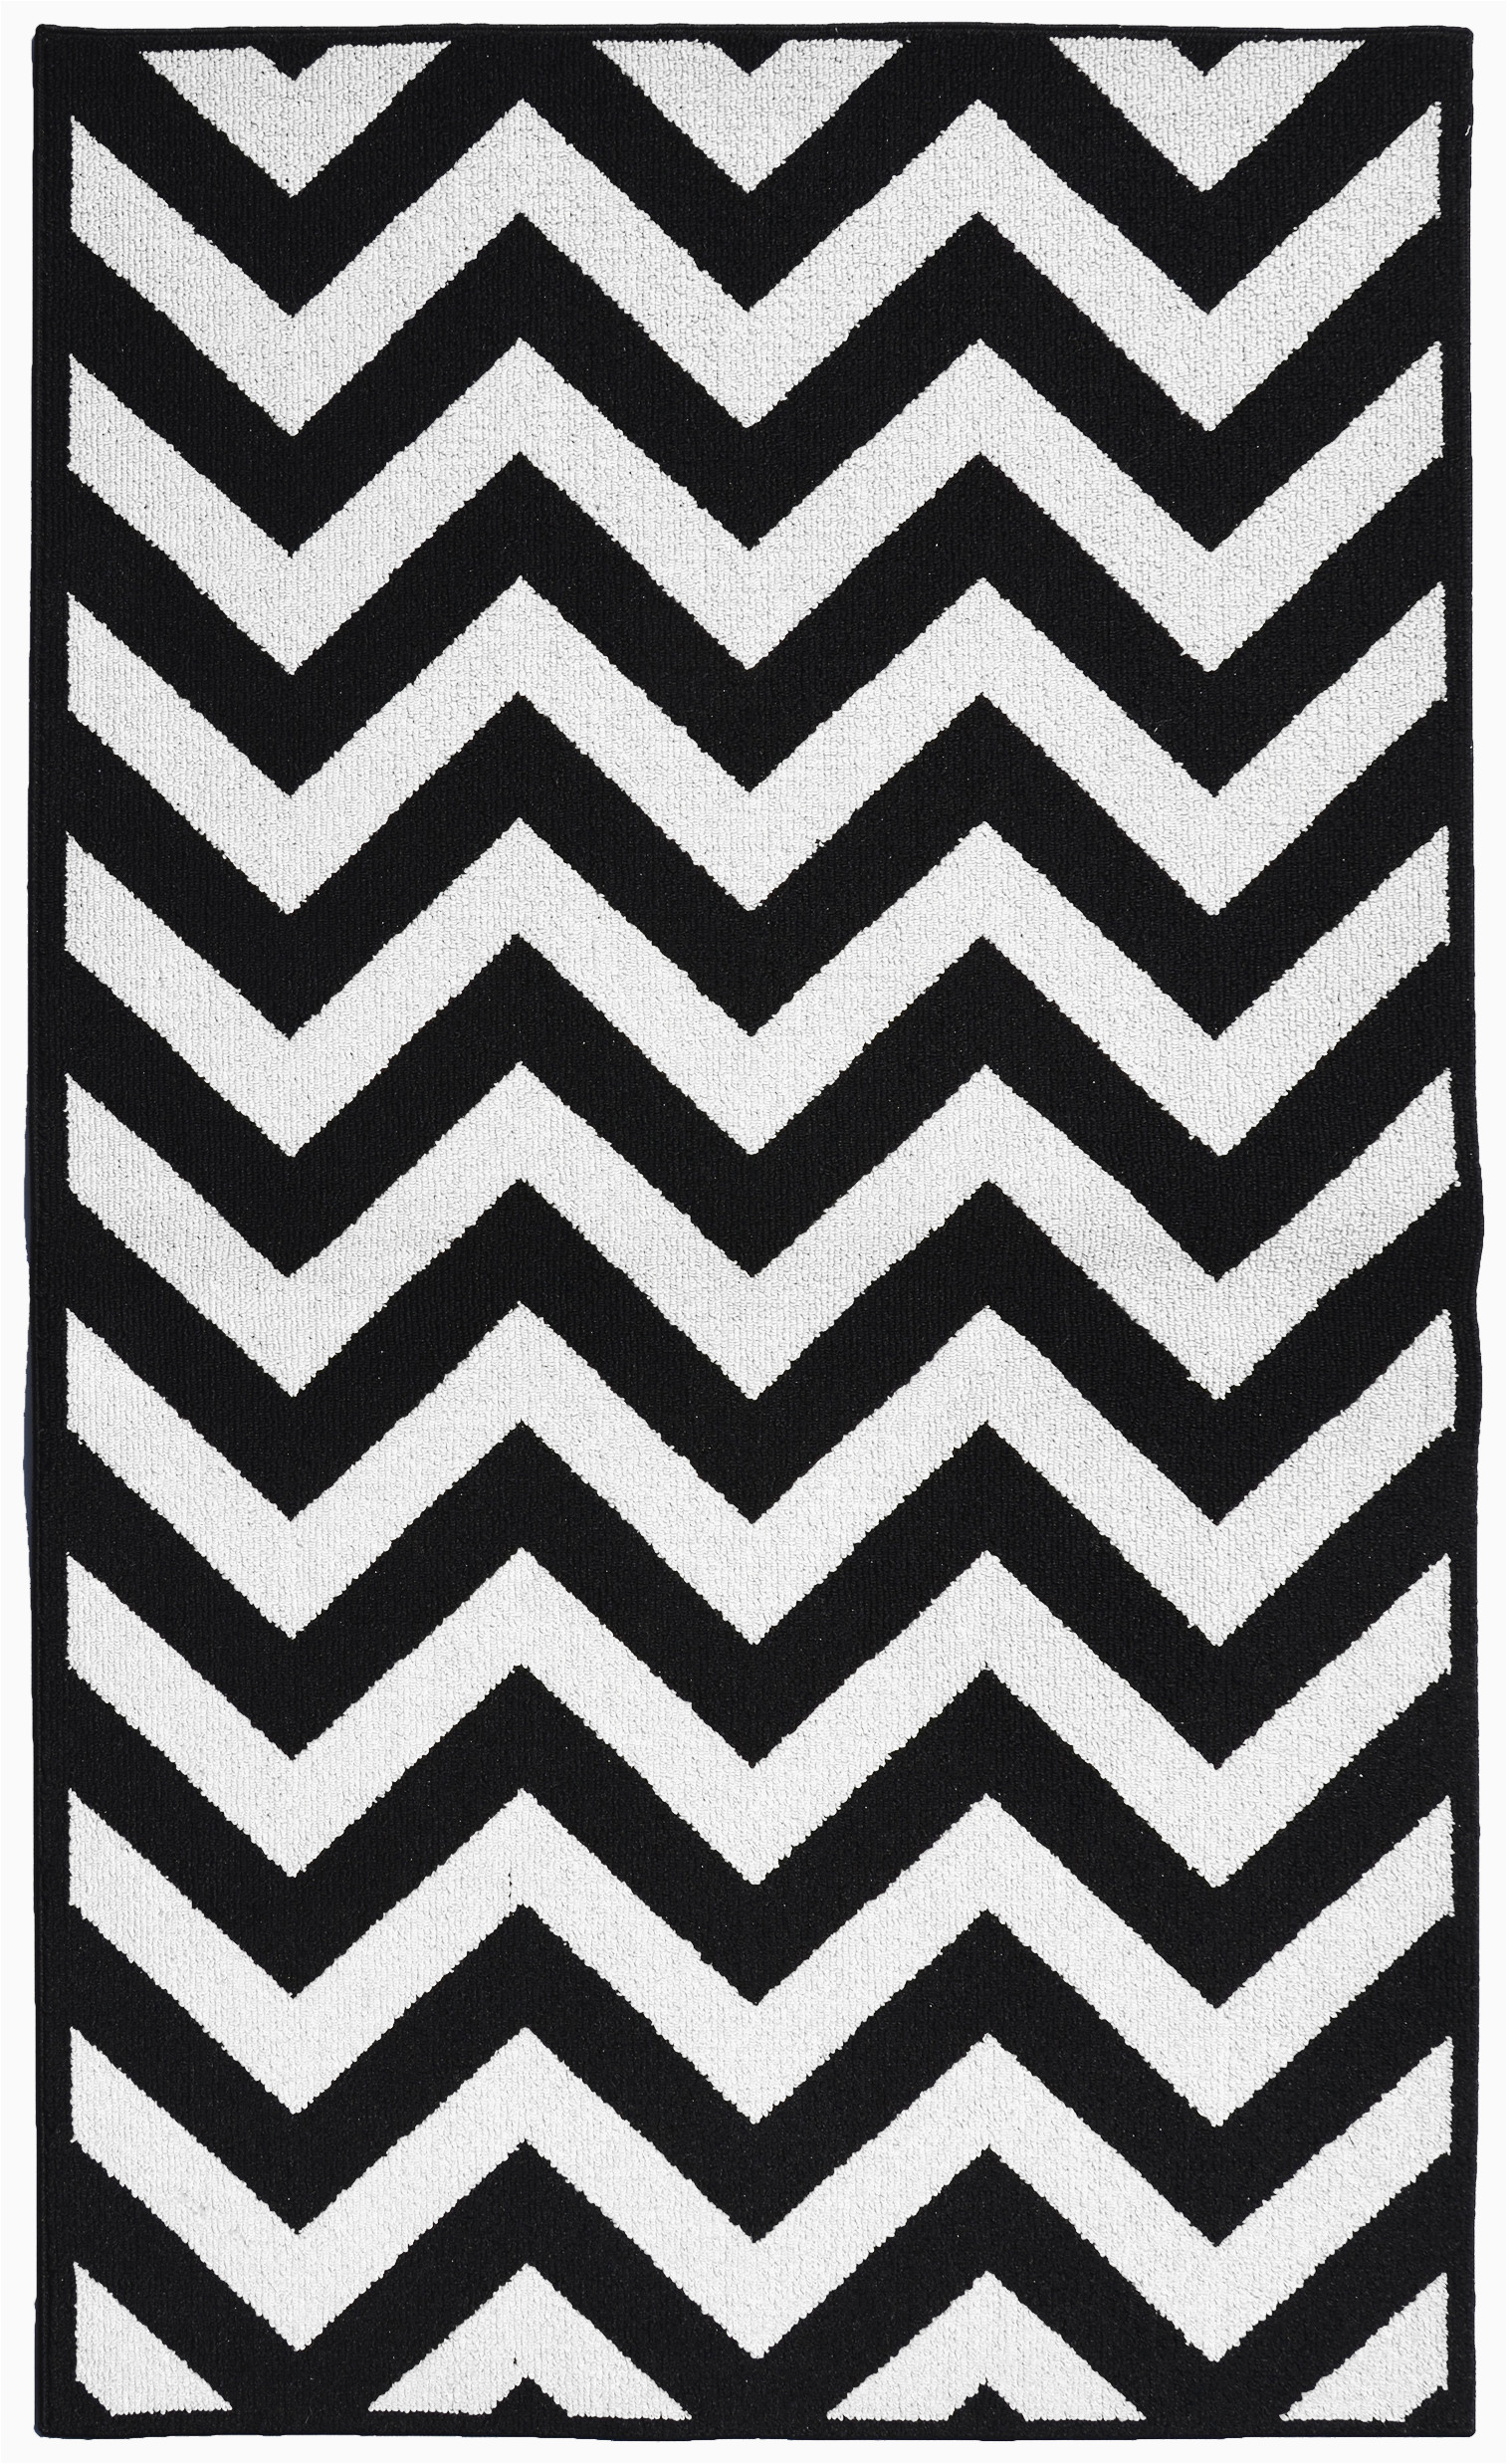 Cheap Black and White area Rugs Garland Rug Large Cheveron Black/white 5’x7′ Indoor area Rug